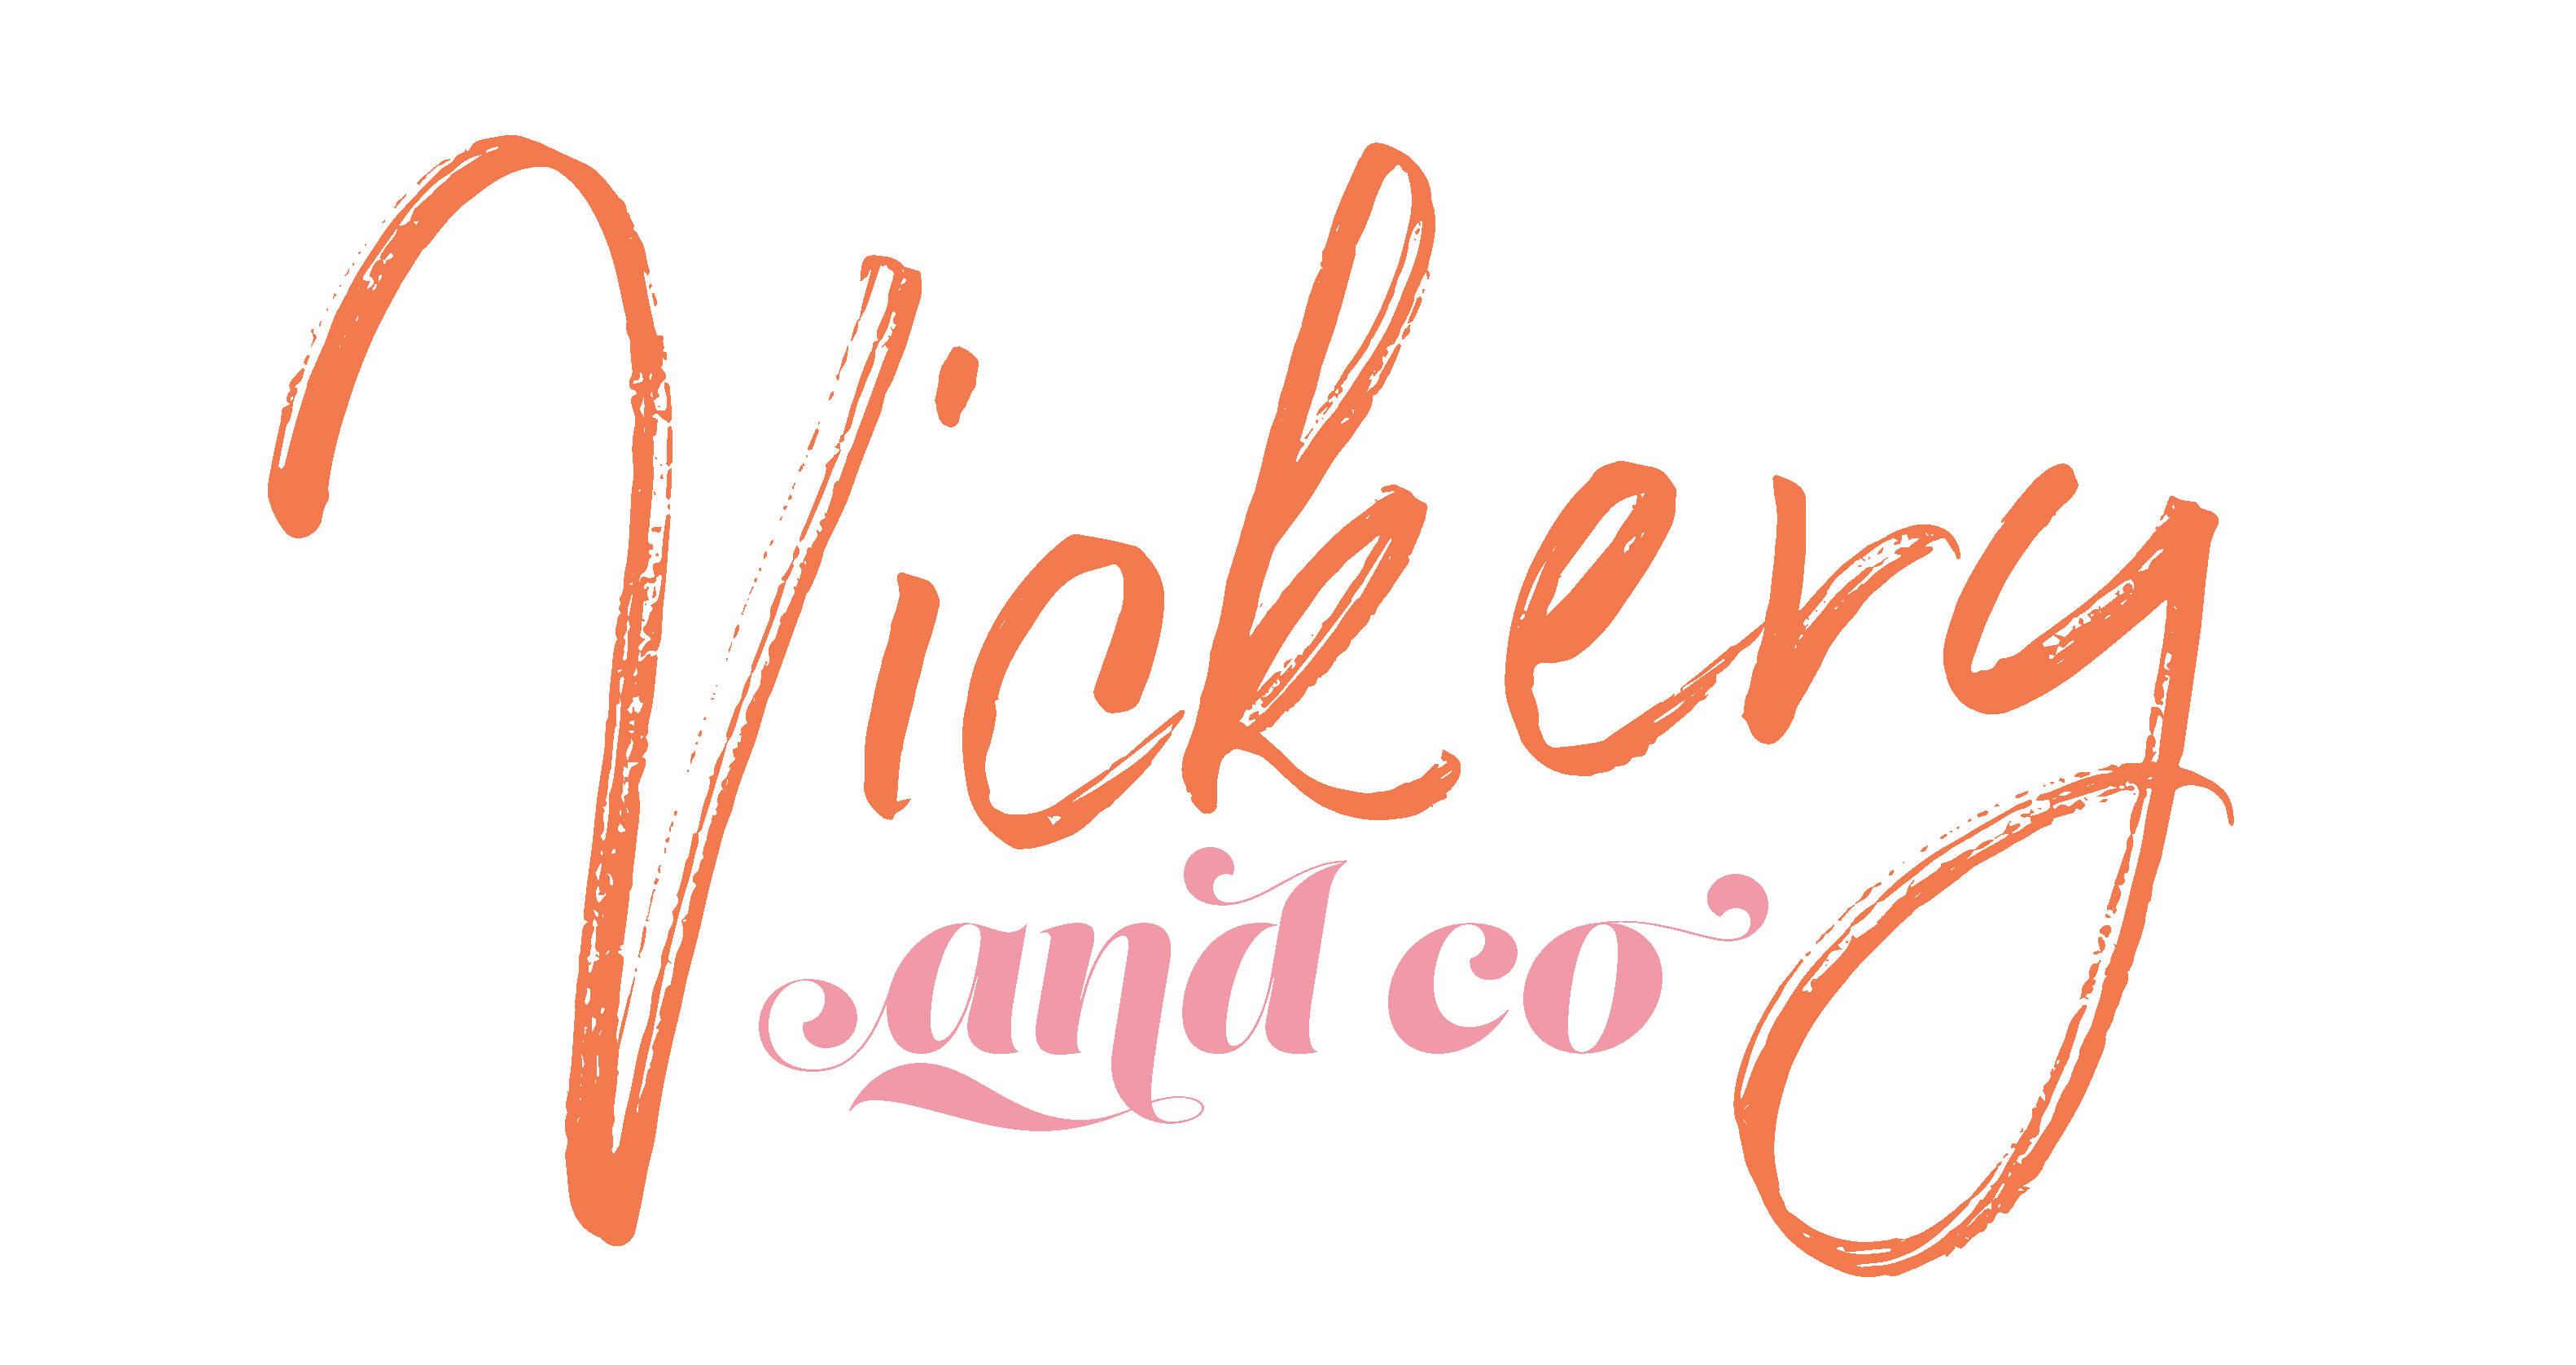 Vickery and Co | Success and Leadership Coaching with Heather Vickery